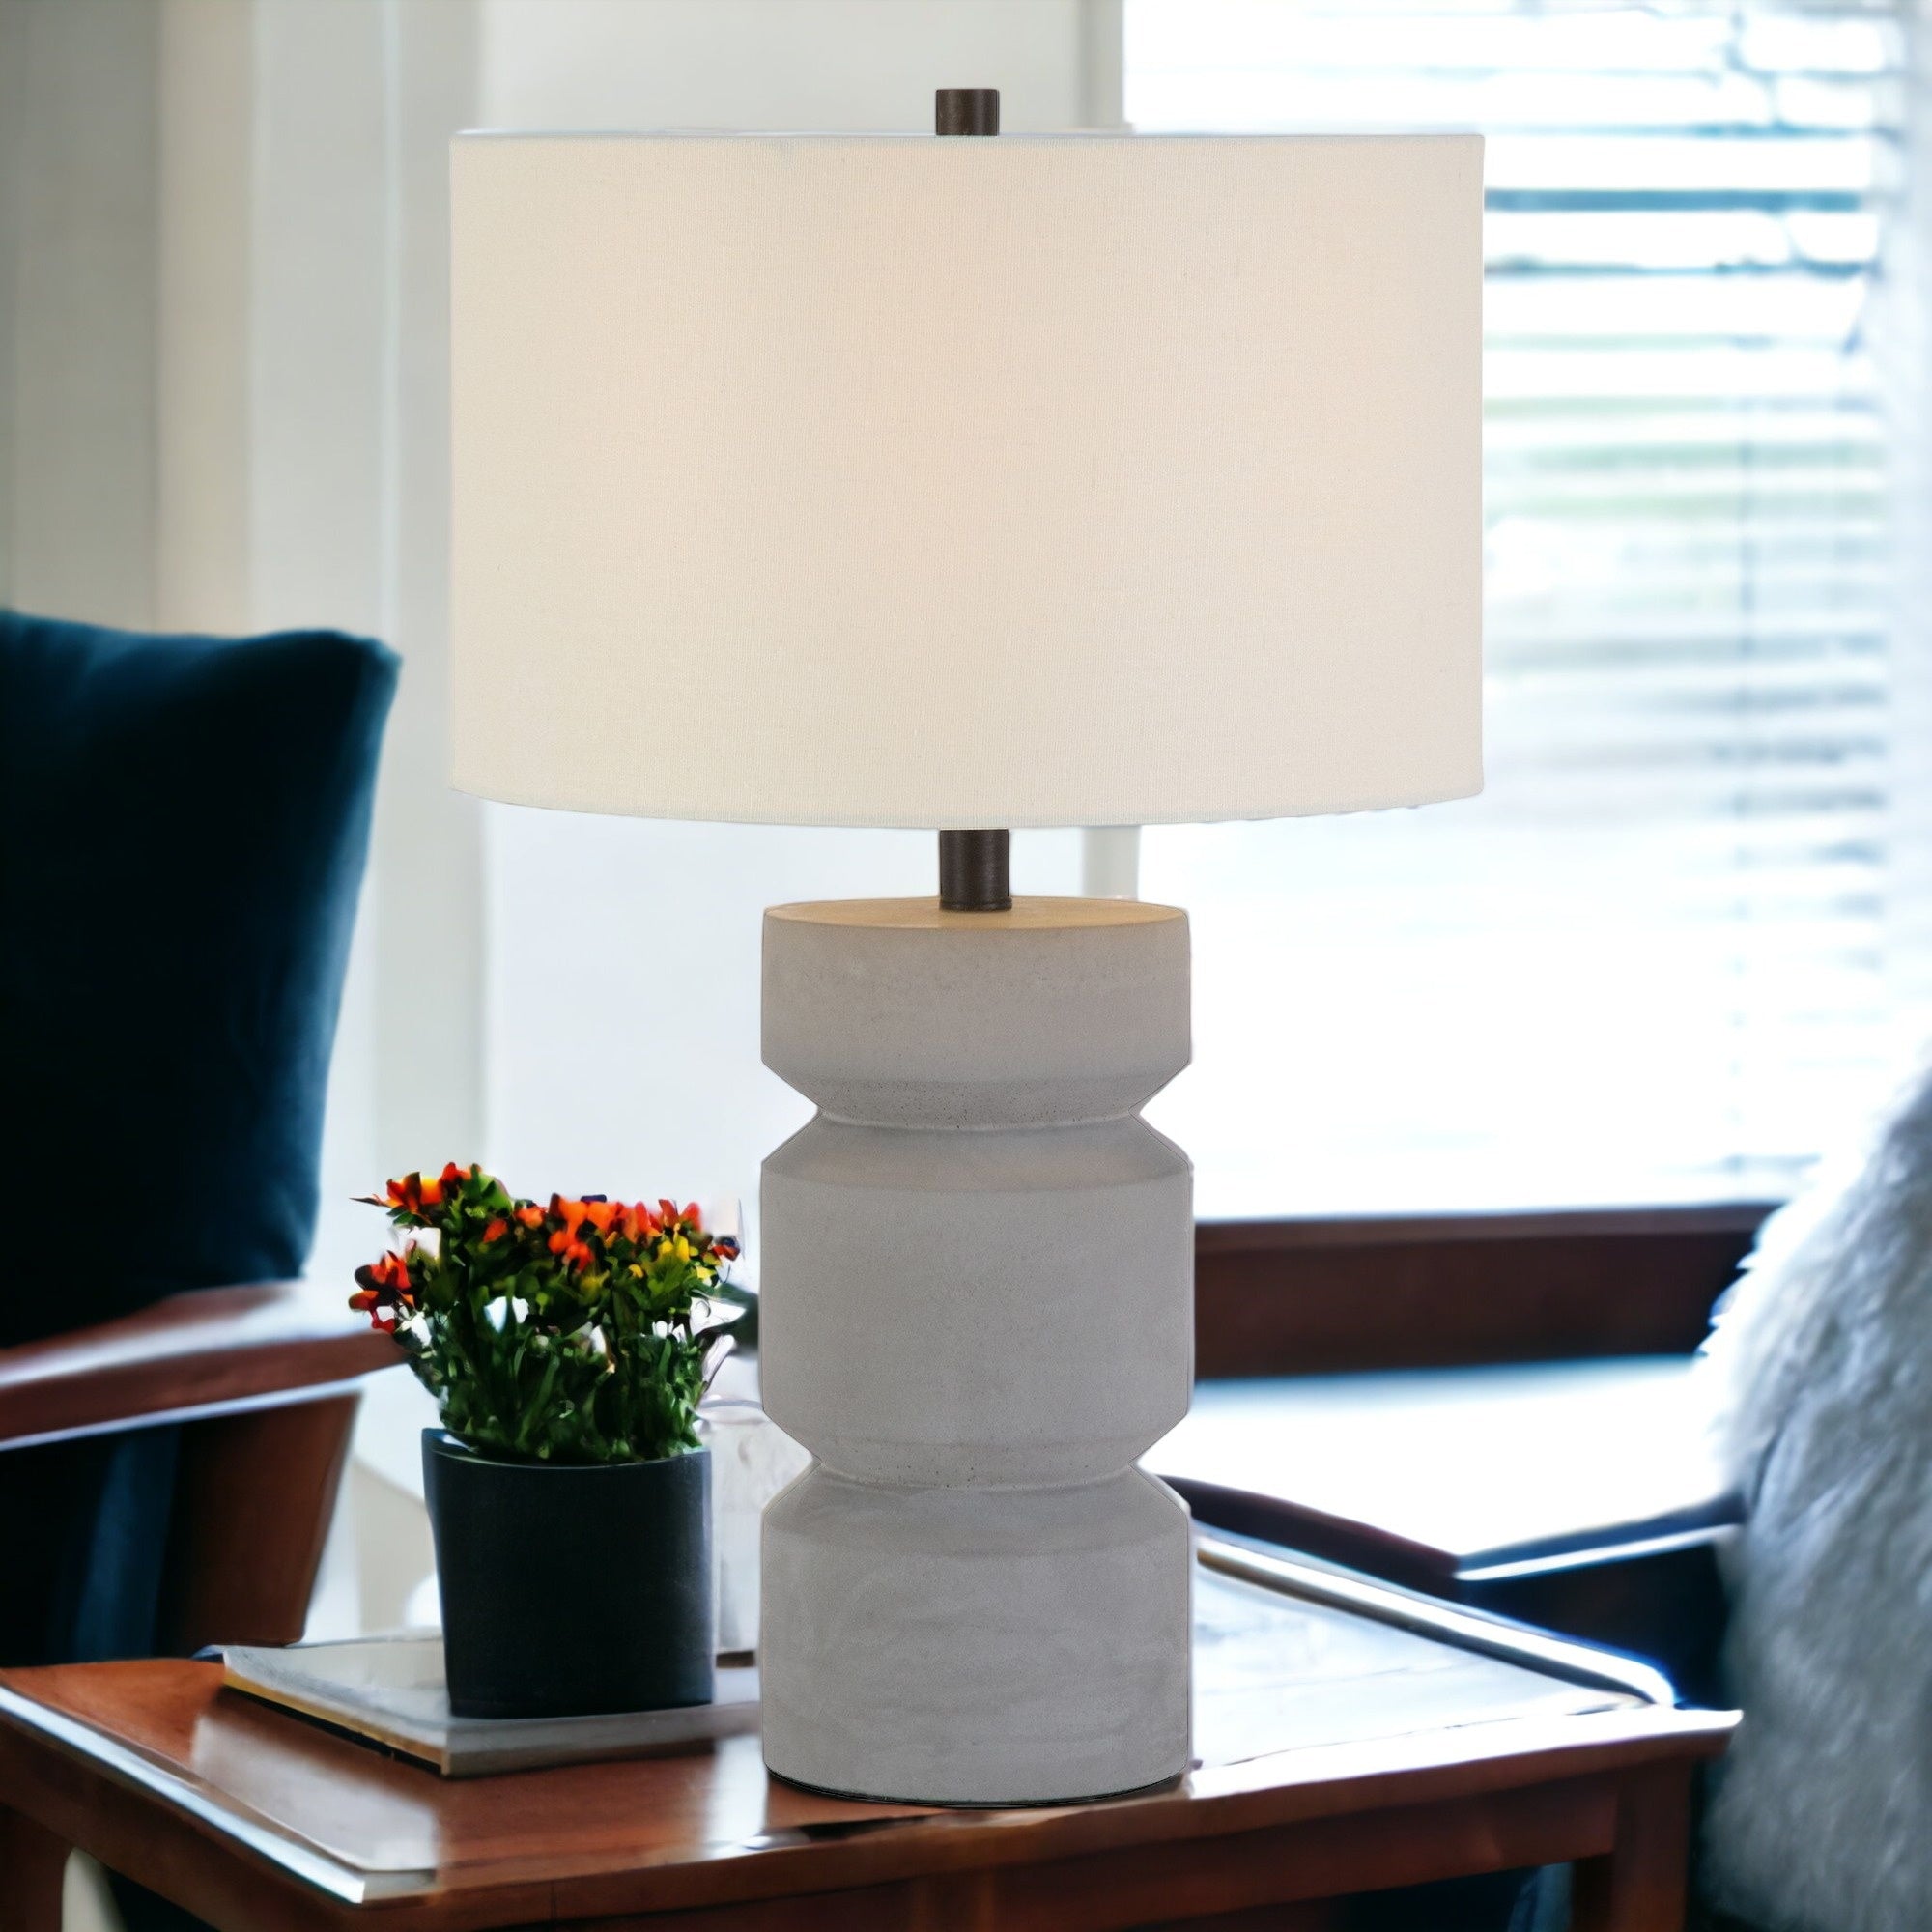 23" Gray Concrete Faceted Column Table Lamp With White Drum Shade